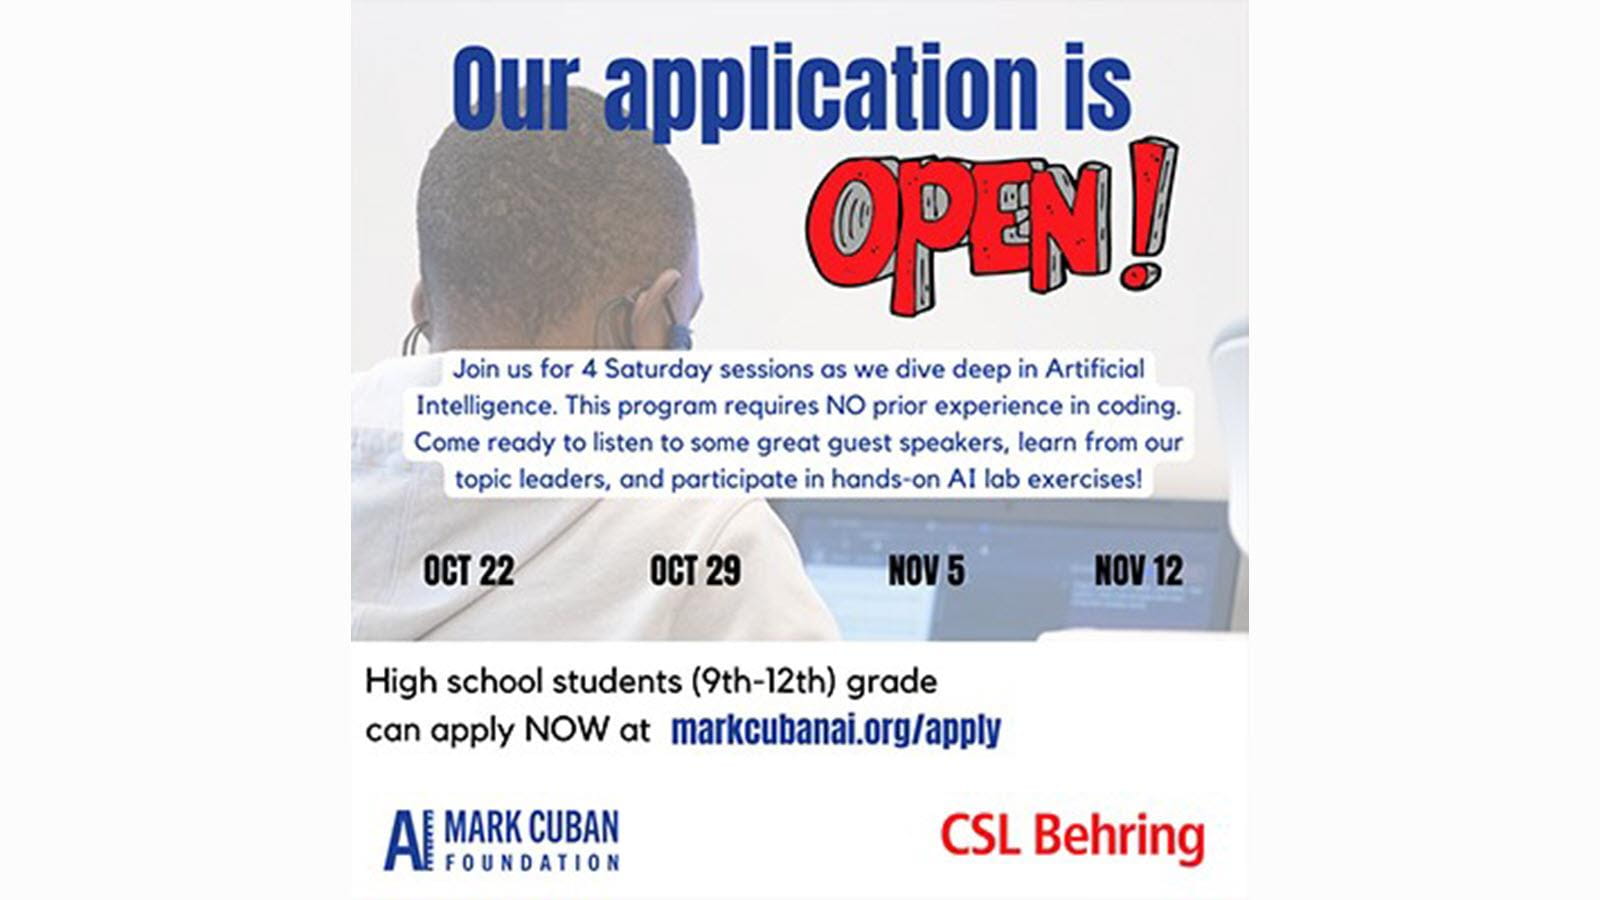 Applications are open for the AI workshop provided by the Mark Cuban Foundation and sponsored by CSL Behring